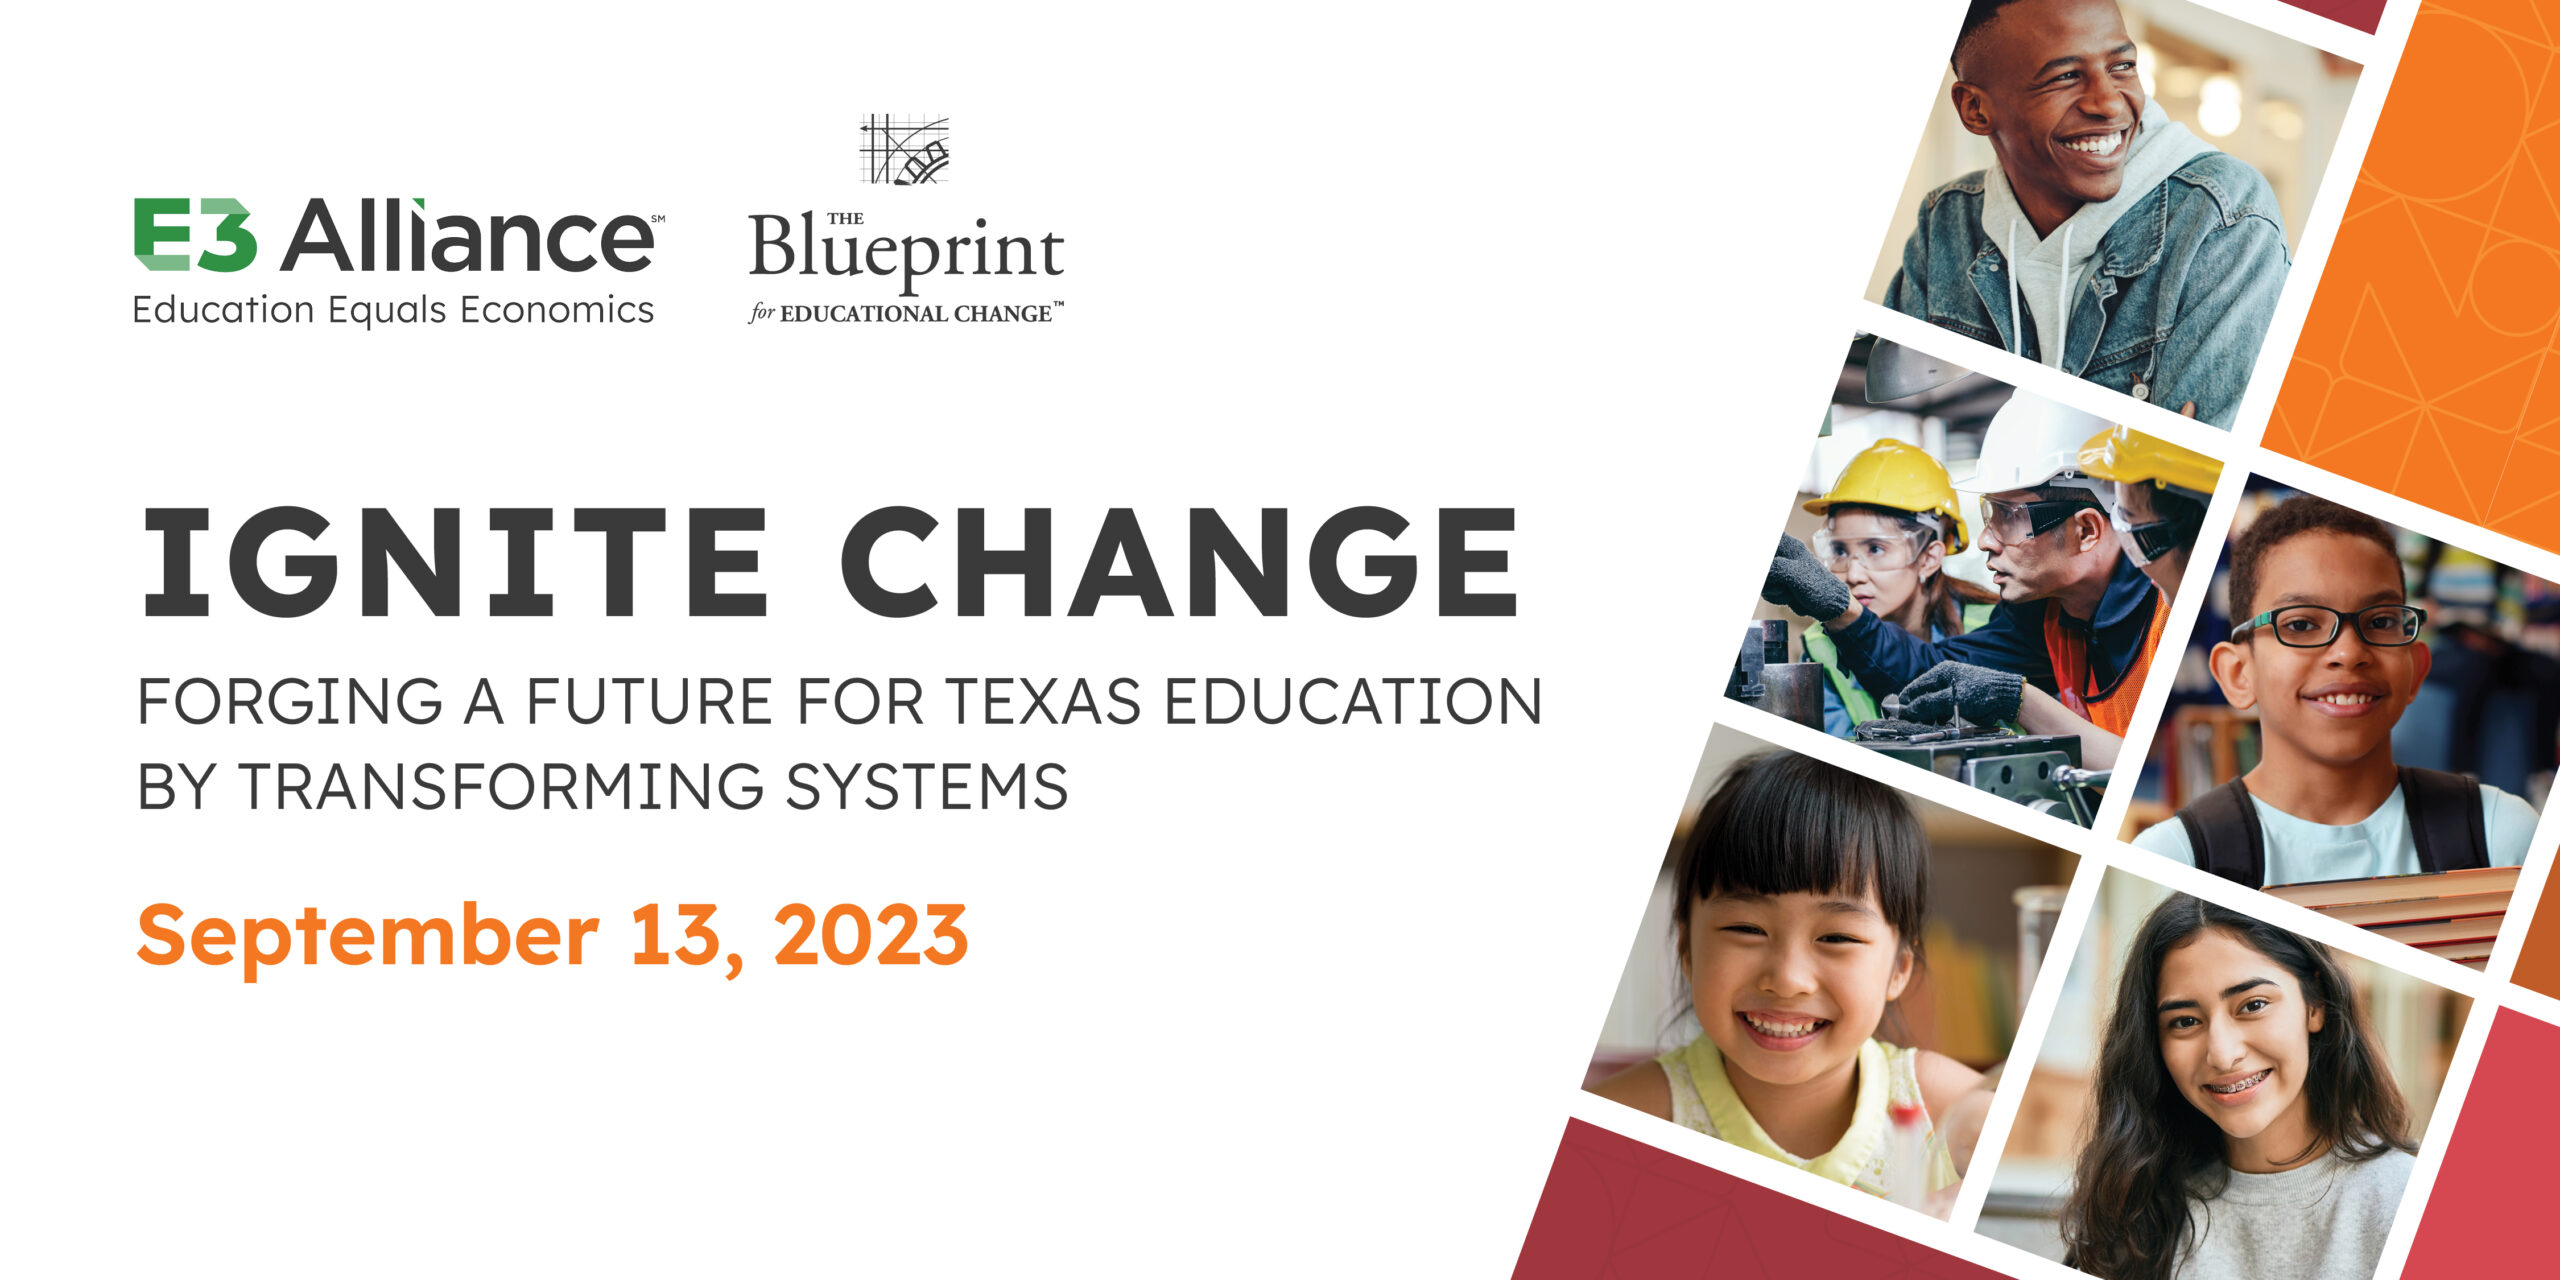 Blueprint for Educational Change - Ignite Change: Forging a future for Texas education by transforming systems on September 13, 2023